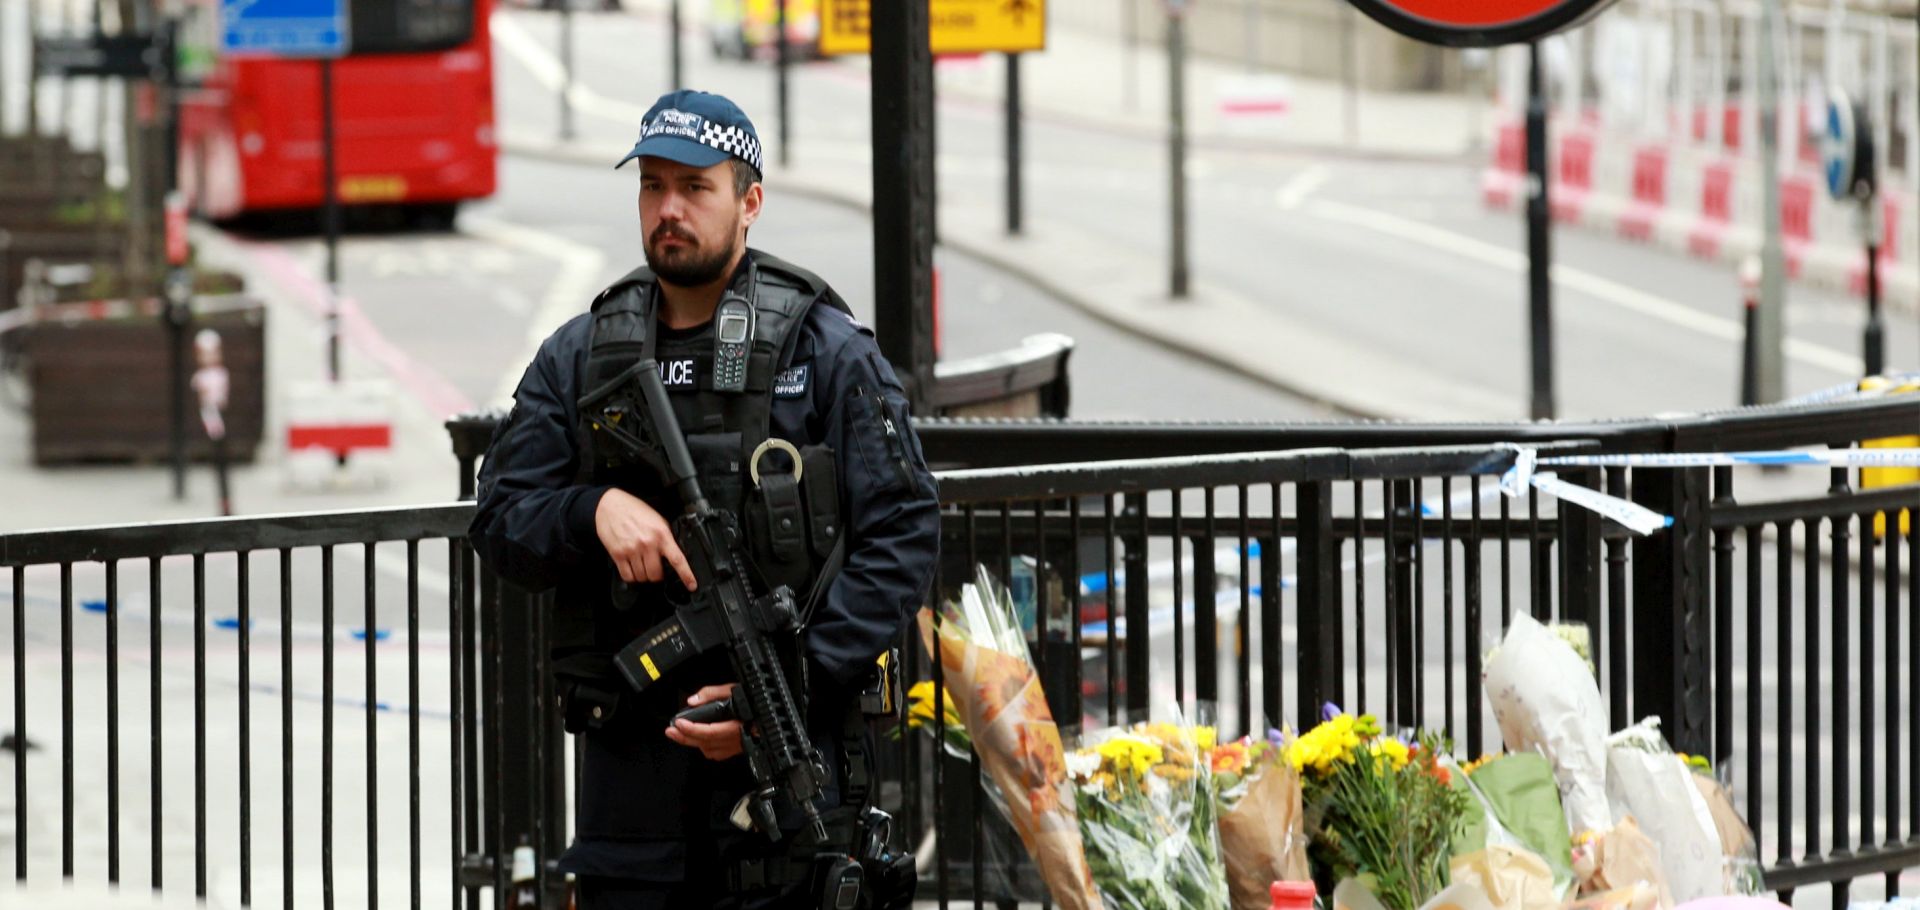 epa06010230 A British police officer on patrol around London Bridge near the site of an attack, London, Britain, 04 June 2017. At least seven members of the public were killed and dozens injured after three attackers on late 03 June plowed a van into pedestrians and later randomly stabbed people on London Bridge and nearby Borough Market. The three attackers wearing fake suicide vests were shot dead by police who are treating the attack as a 'terrorist incident.'  EPA/SEAN DEMPSEY